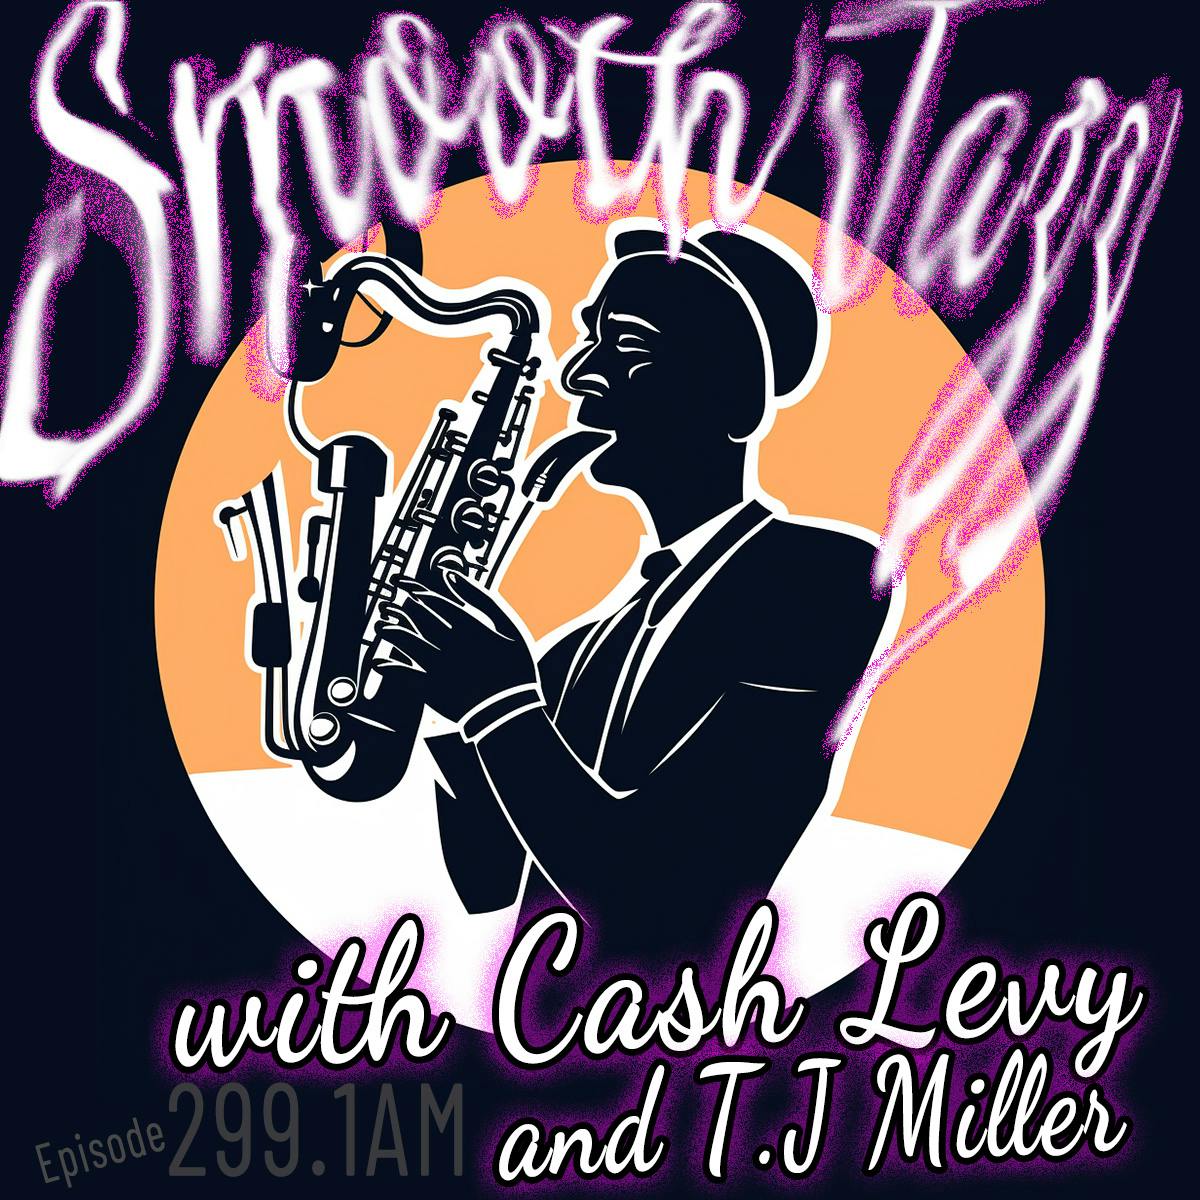 Smooth Jazz with Cash Levy